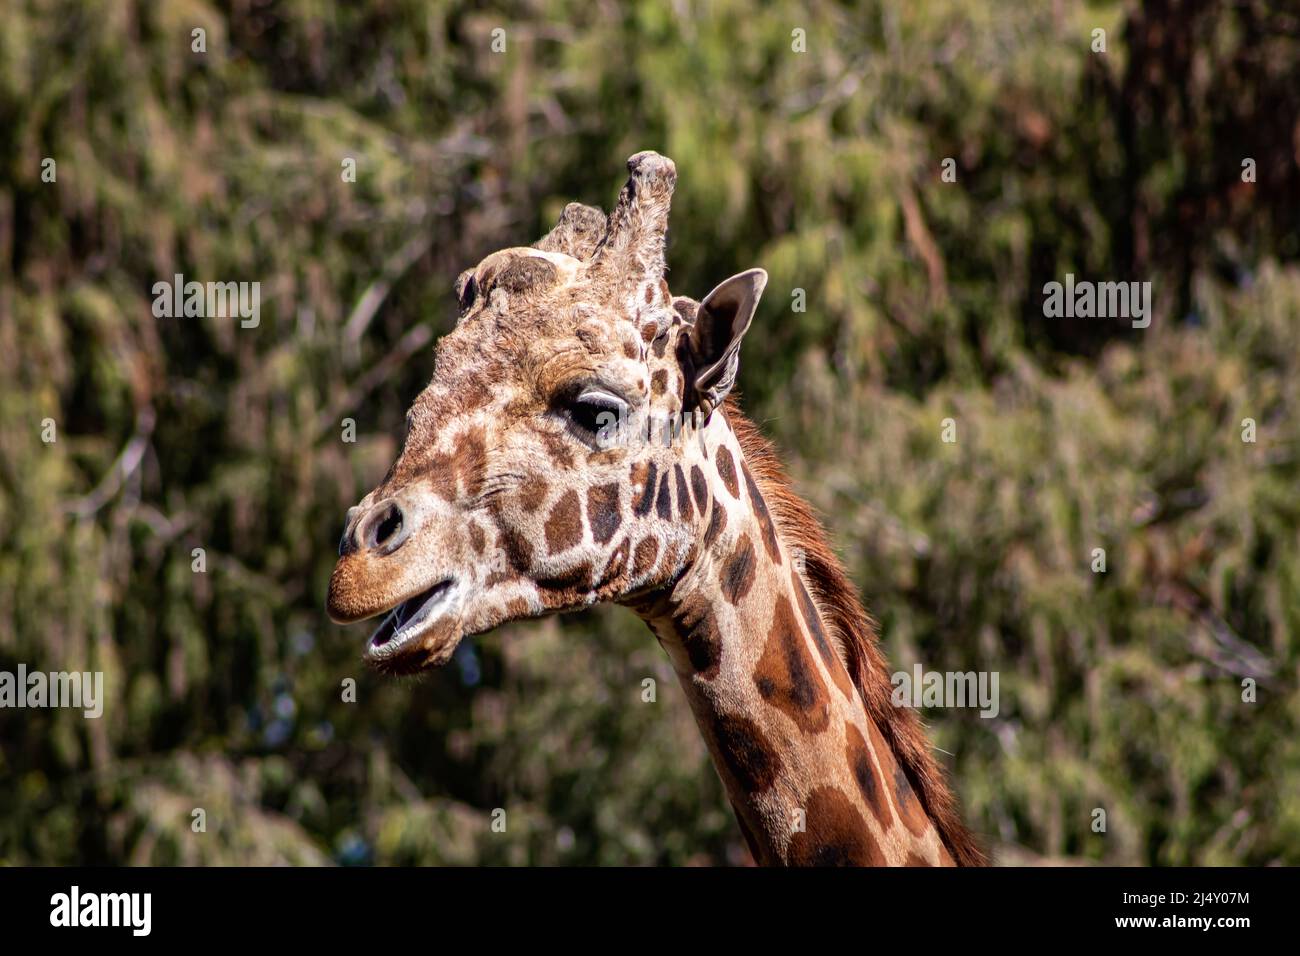 Indifference on the face of an adult giraffe. Stock Photo